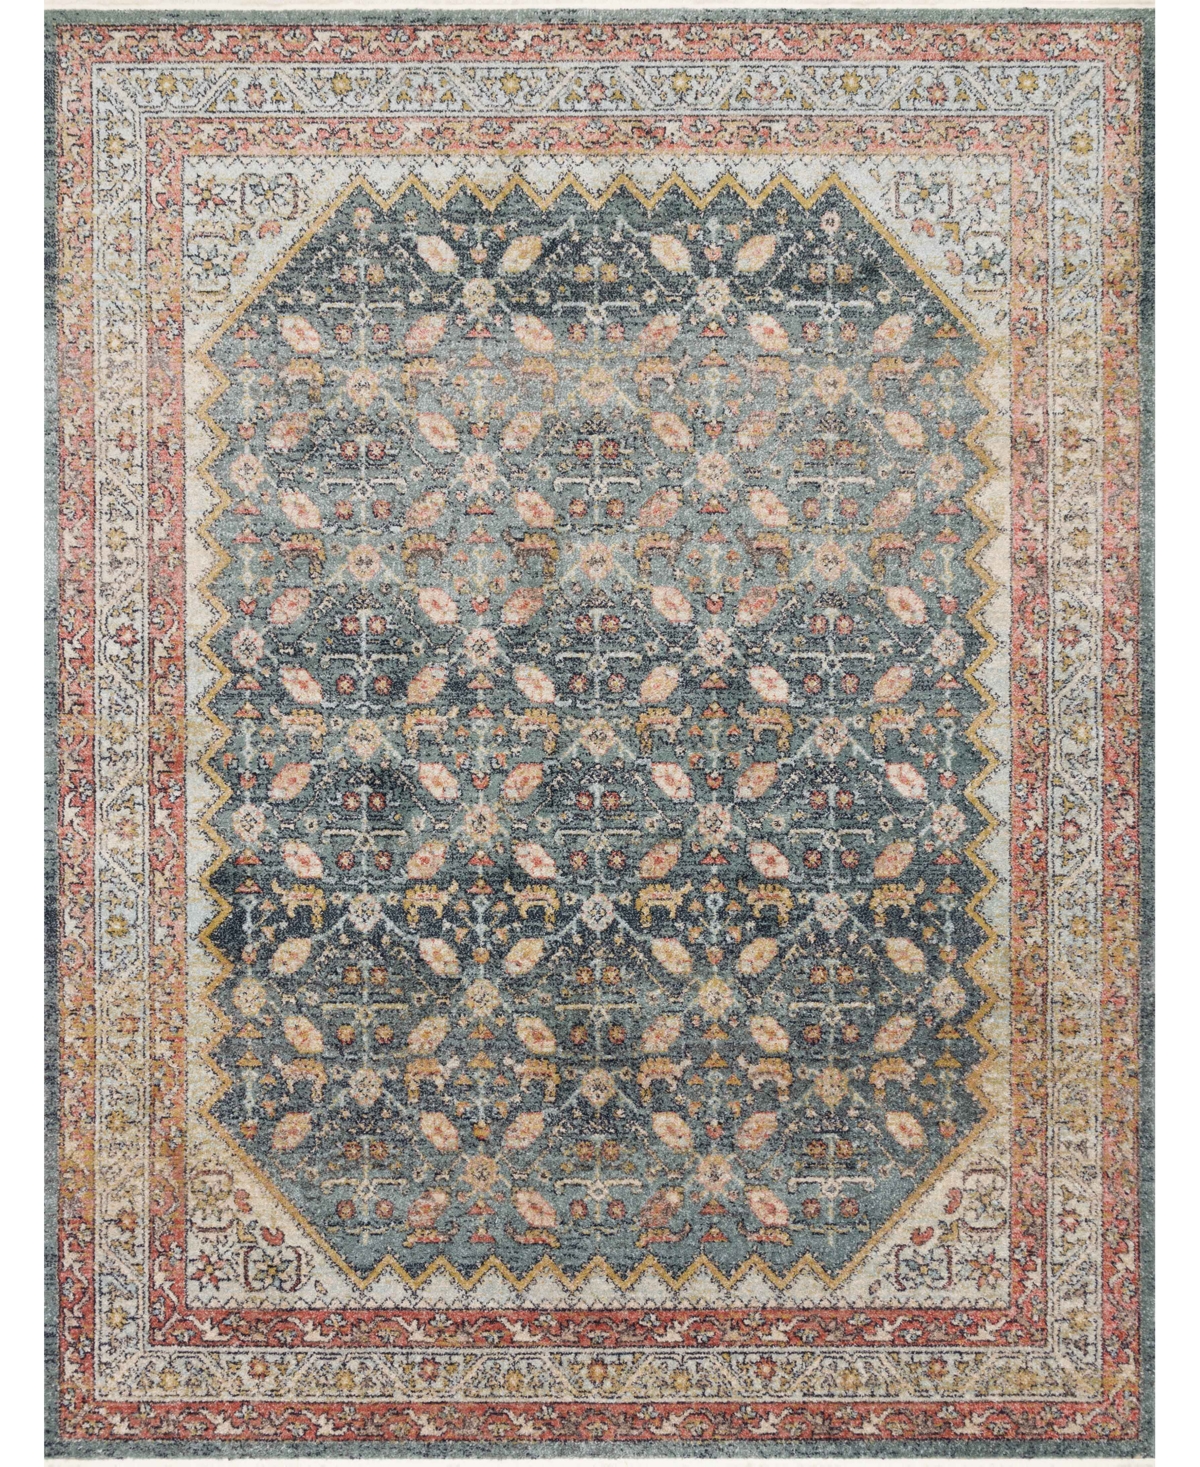 Magnolia Home By Joanna Gaines X Loloi Graham Gra-01 2'3" X 4' Area Rug In Blue